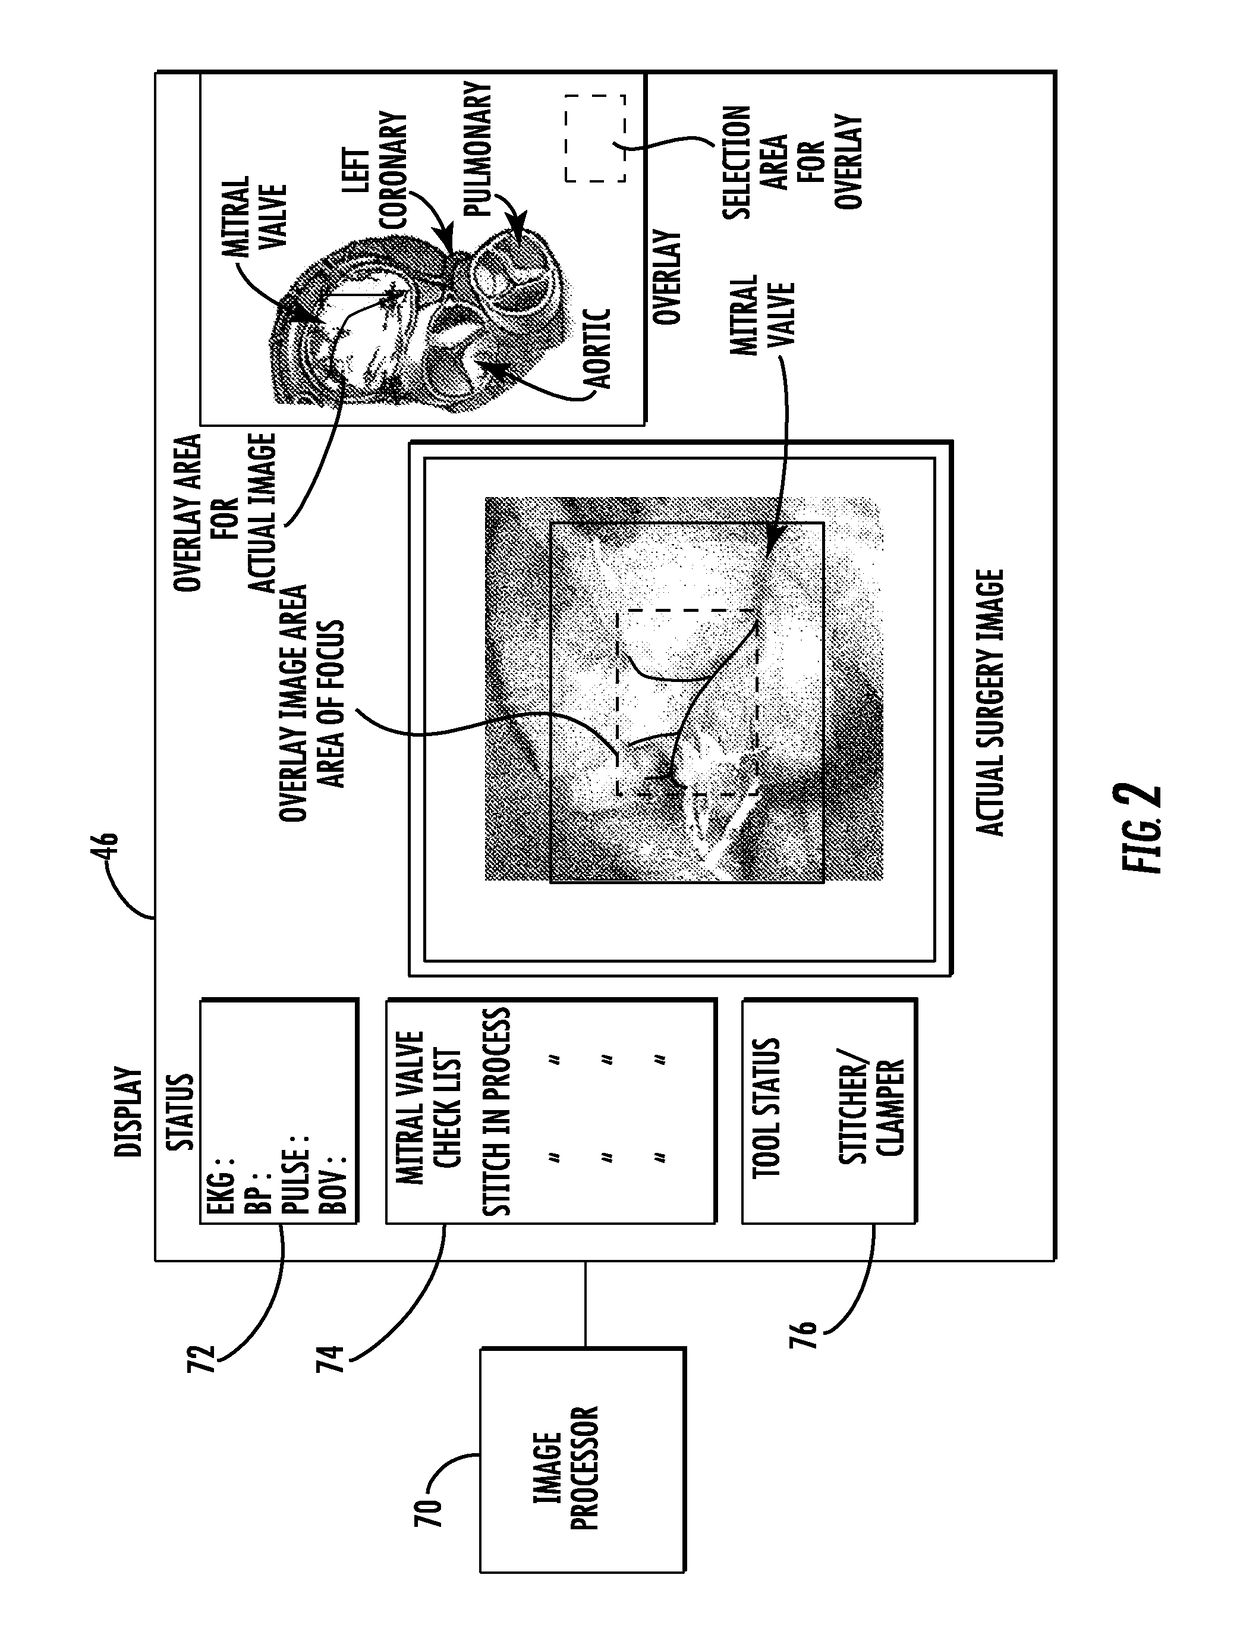 Telerobotic surgery system using minimally invasive surgical tool with variable force scaling and feedback and relayed communications between remote surgeon and surgery station